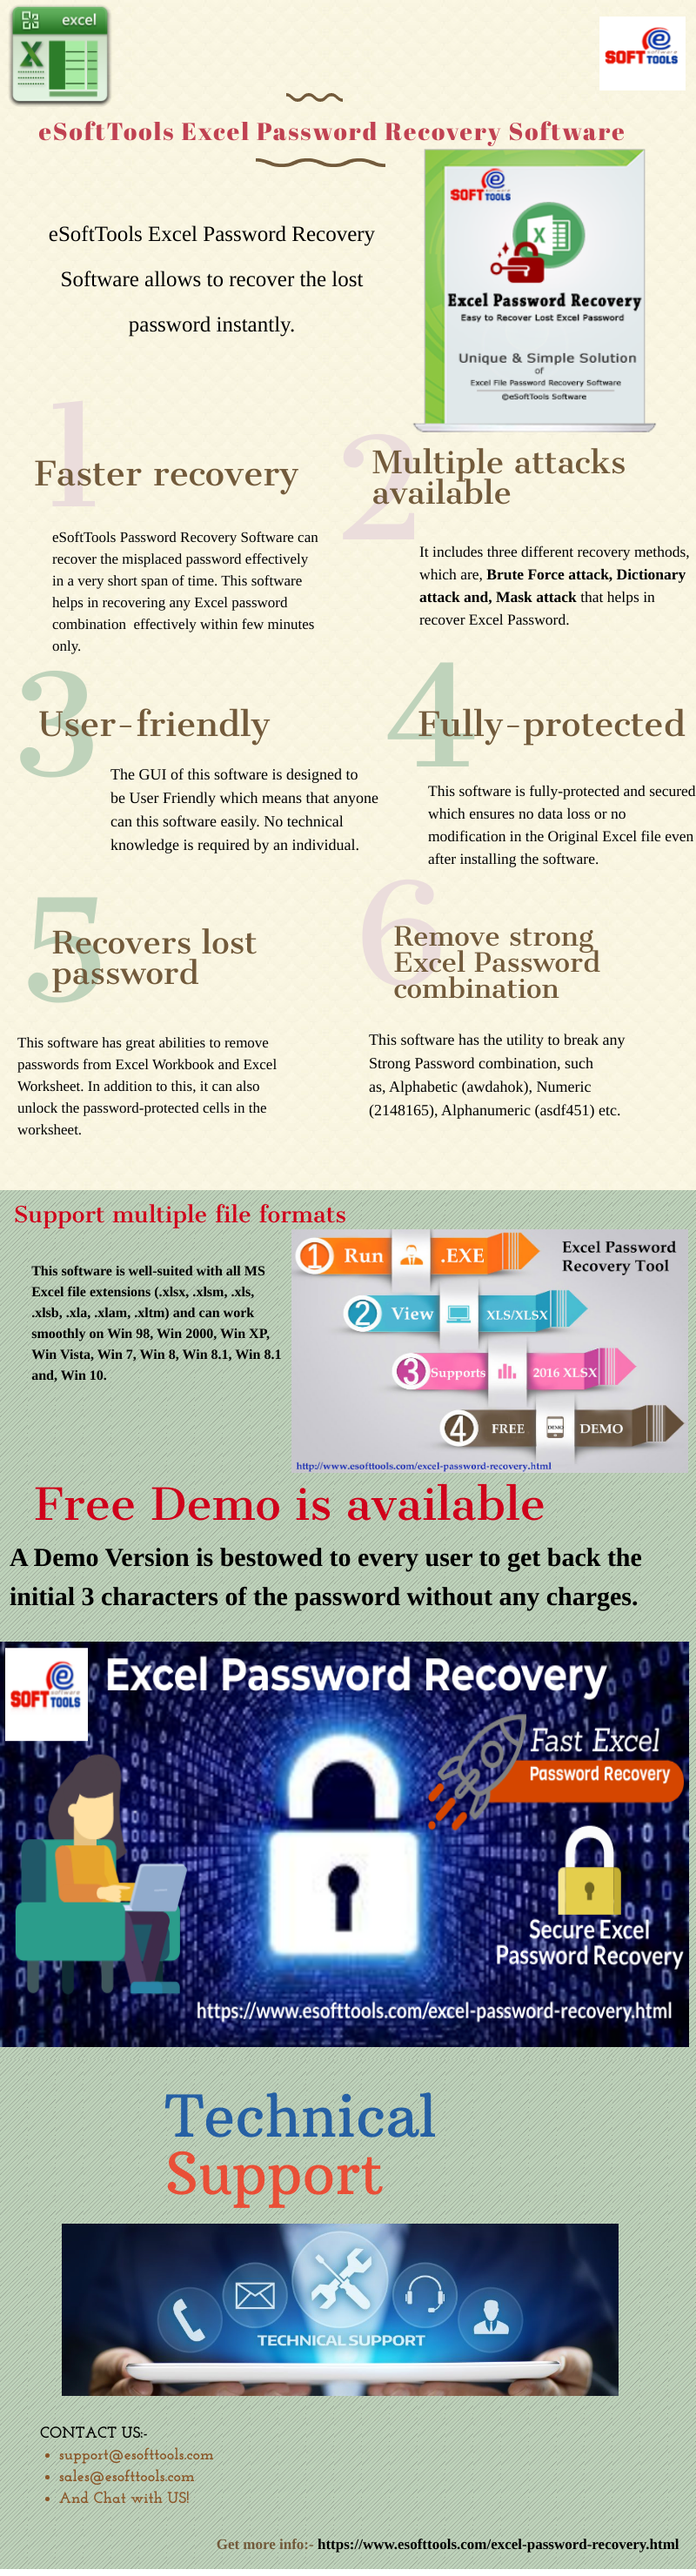 esofttools-excel-password.png